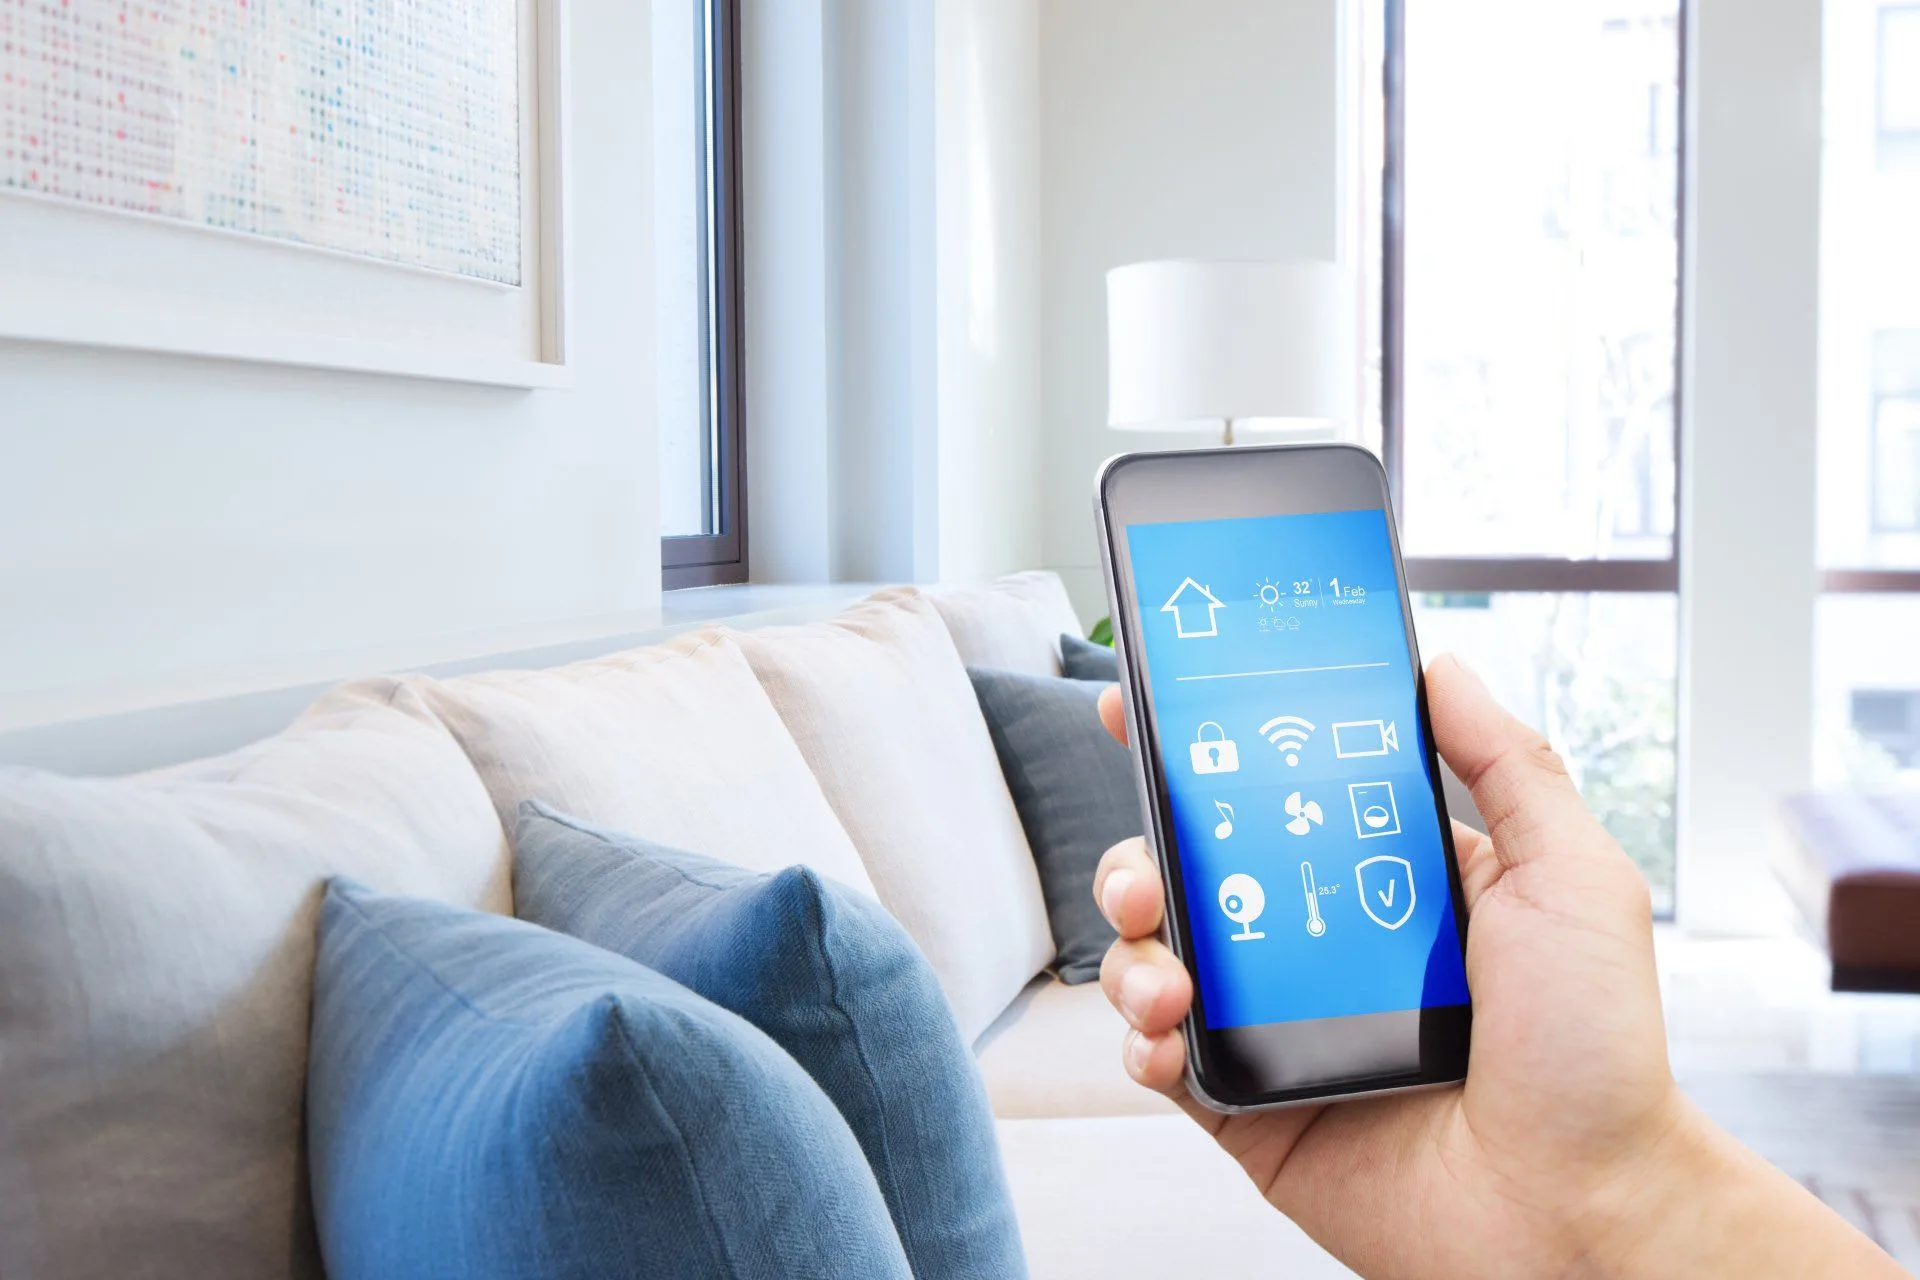 A hand holding a smartphone with a smart home app on the screen.